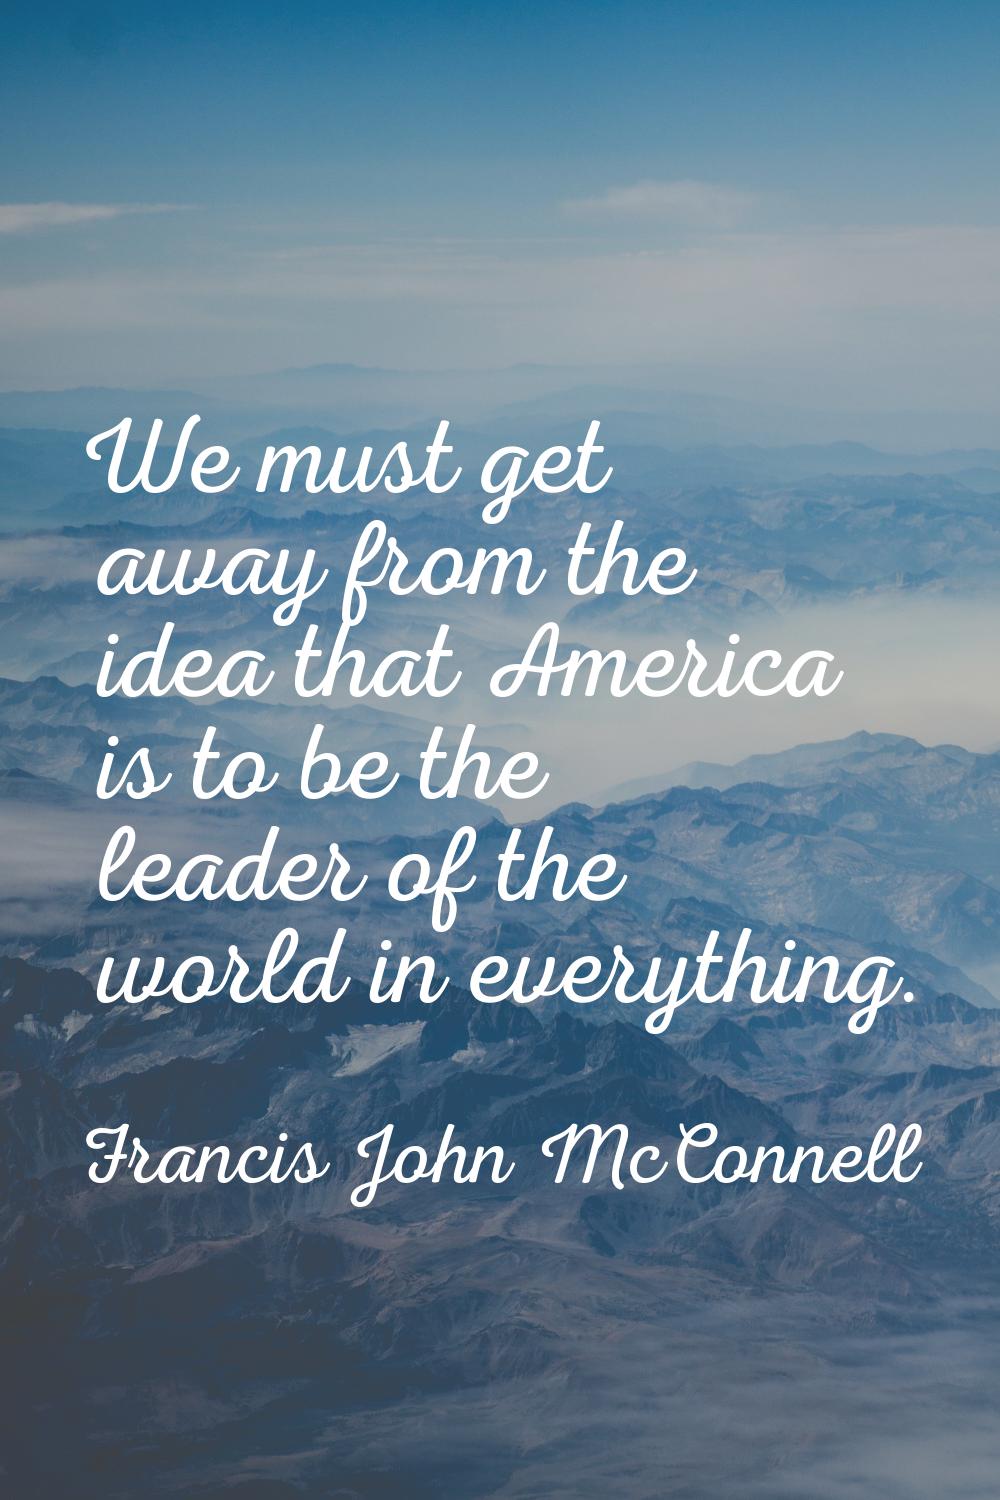 We must get away from the idea that America is to be the leader of the world in everything.